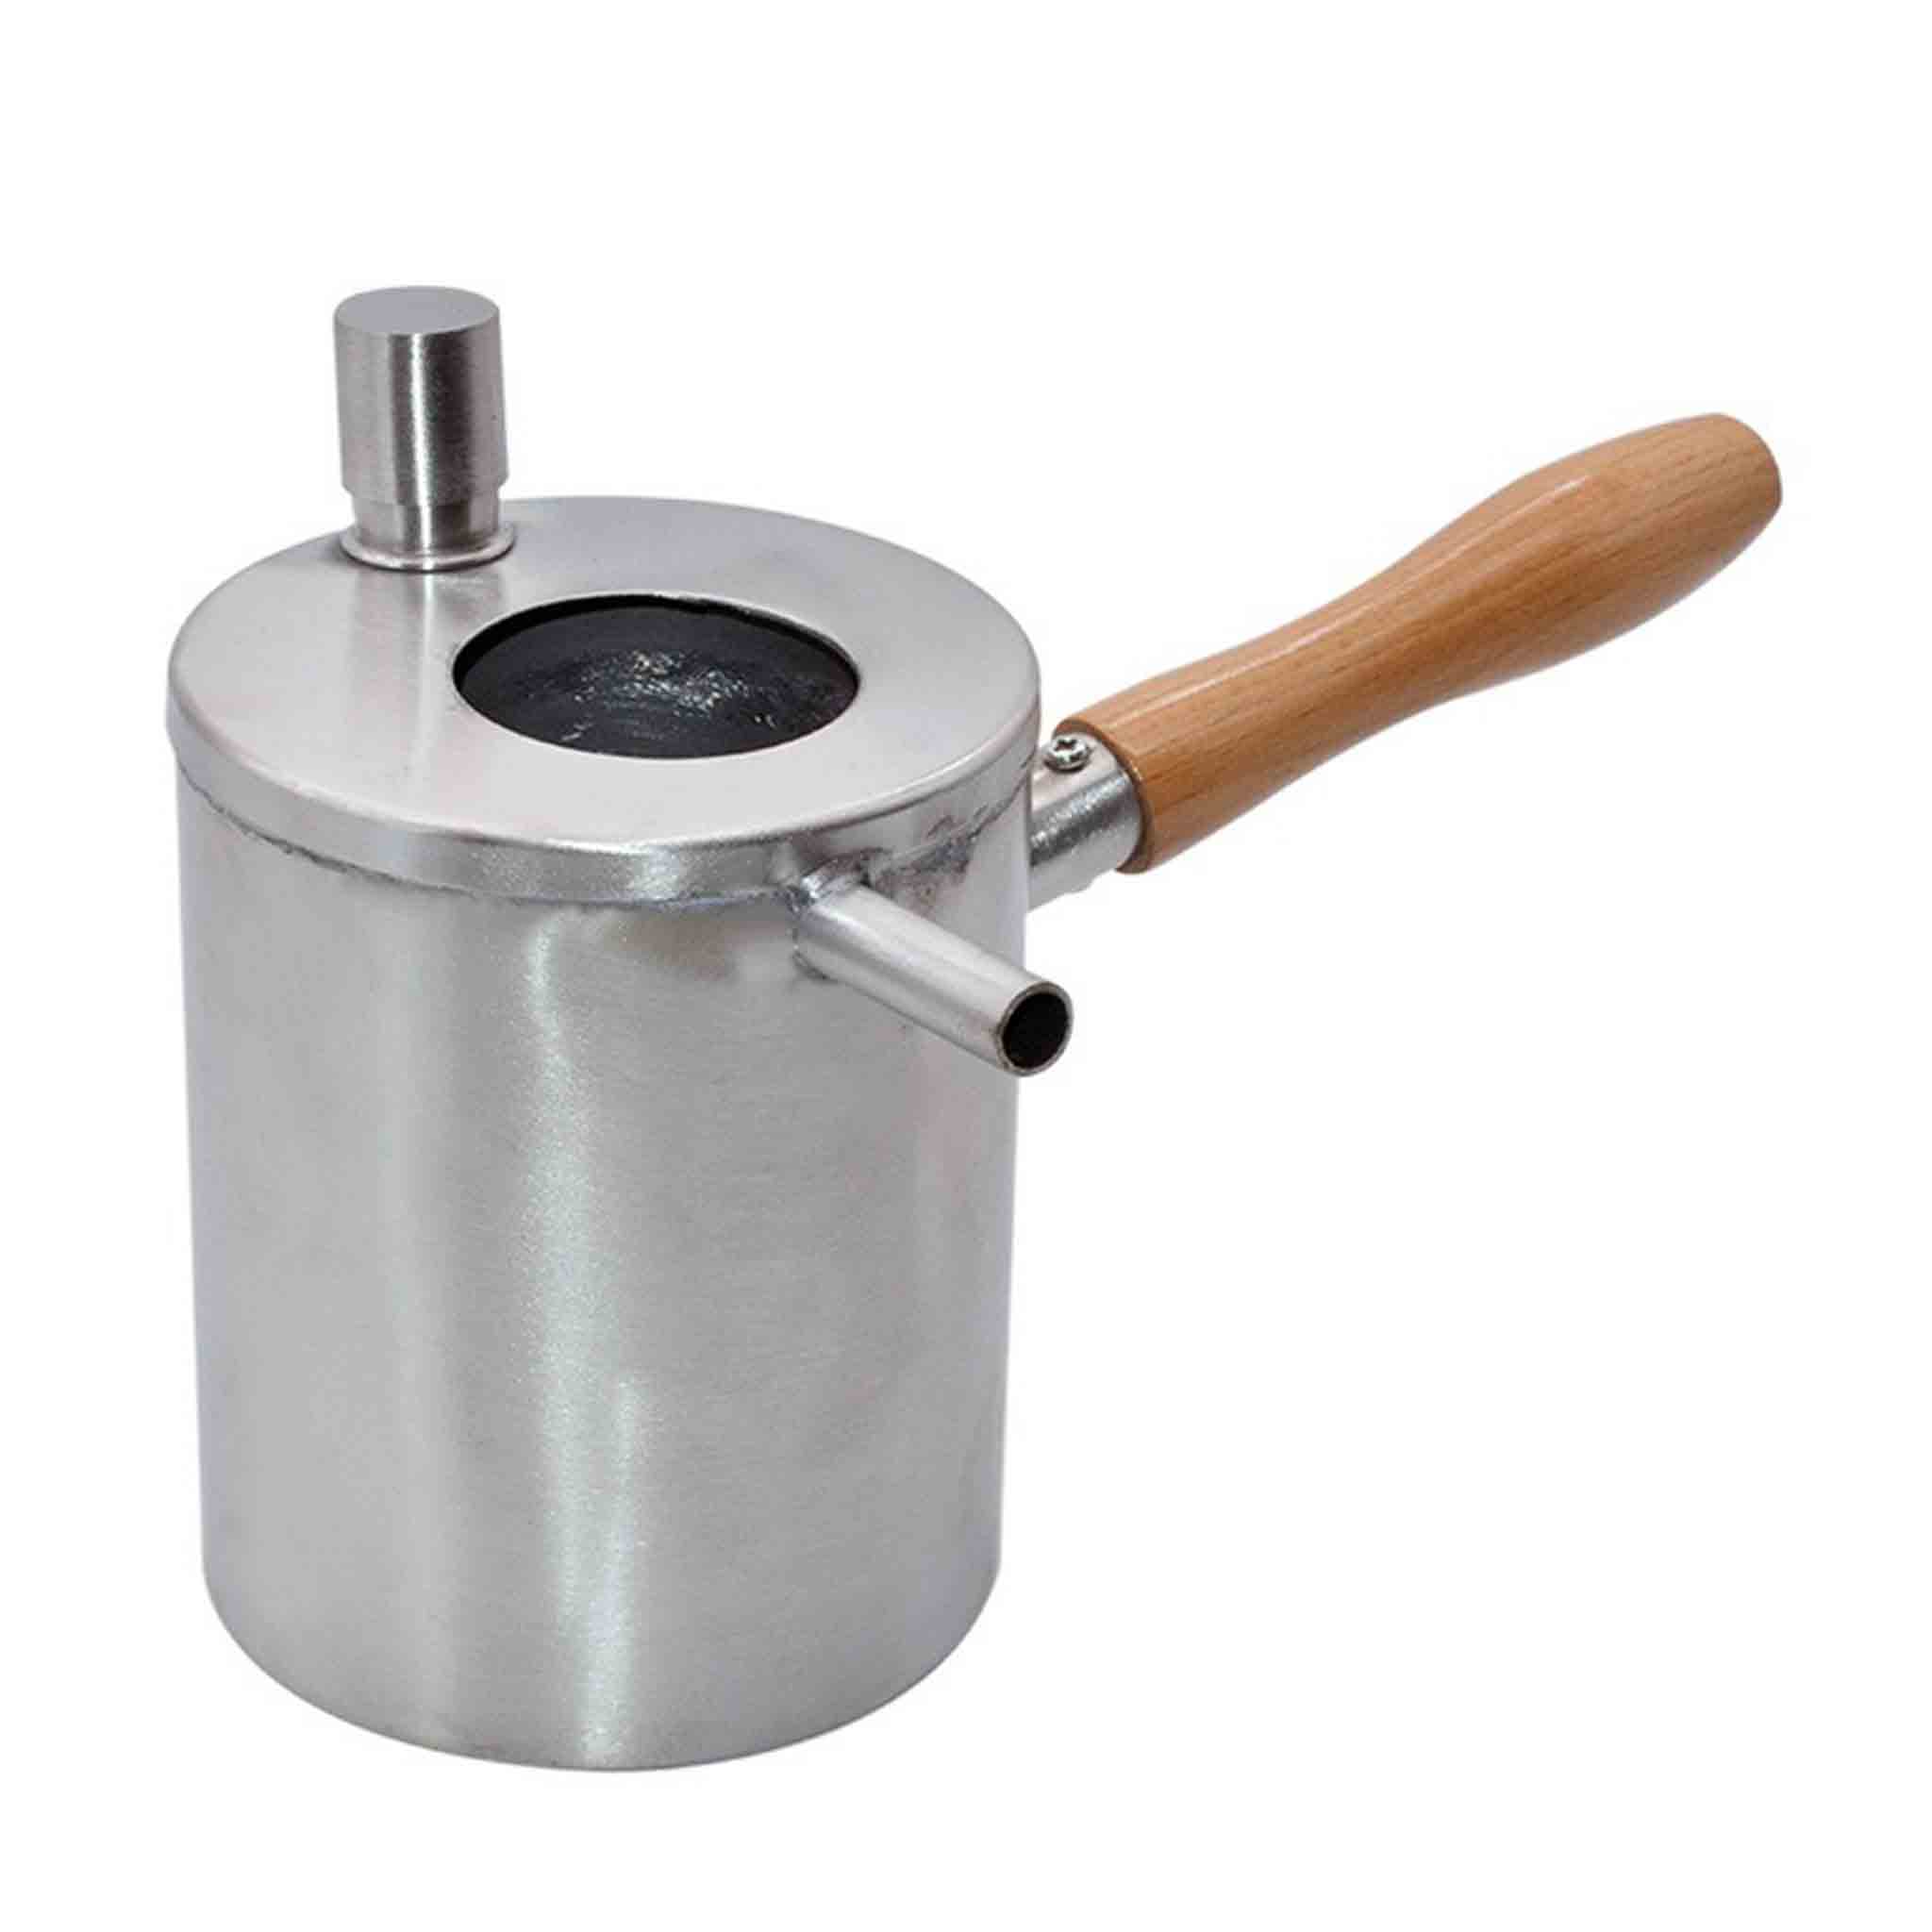 Wax Melting Pot with Poring Spout and Wooden Handle Stainless-steel - Tools collection by Buzzbee Beekeeping Supplies